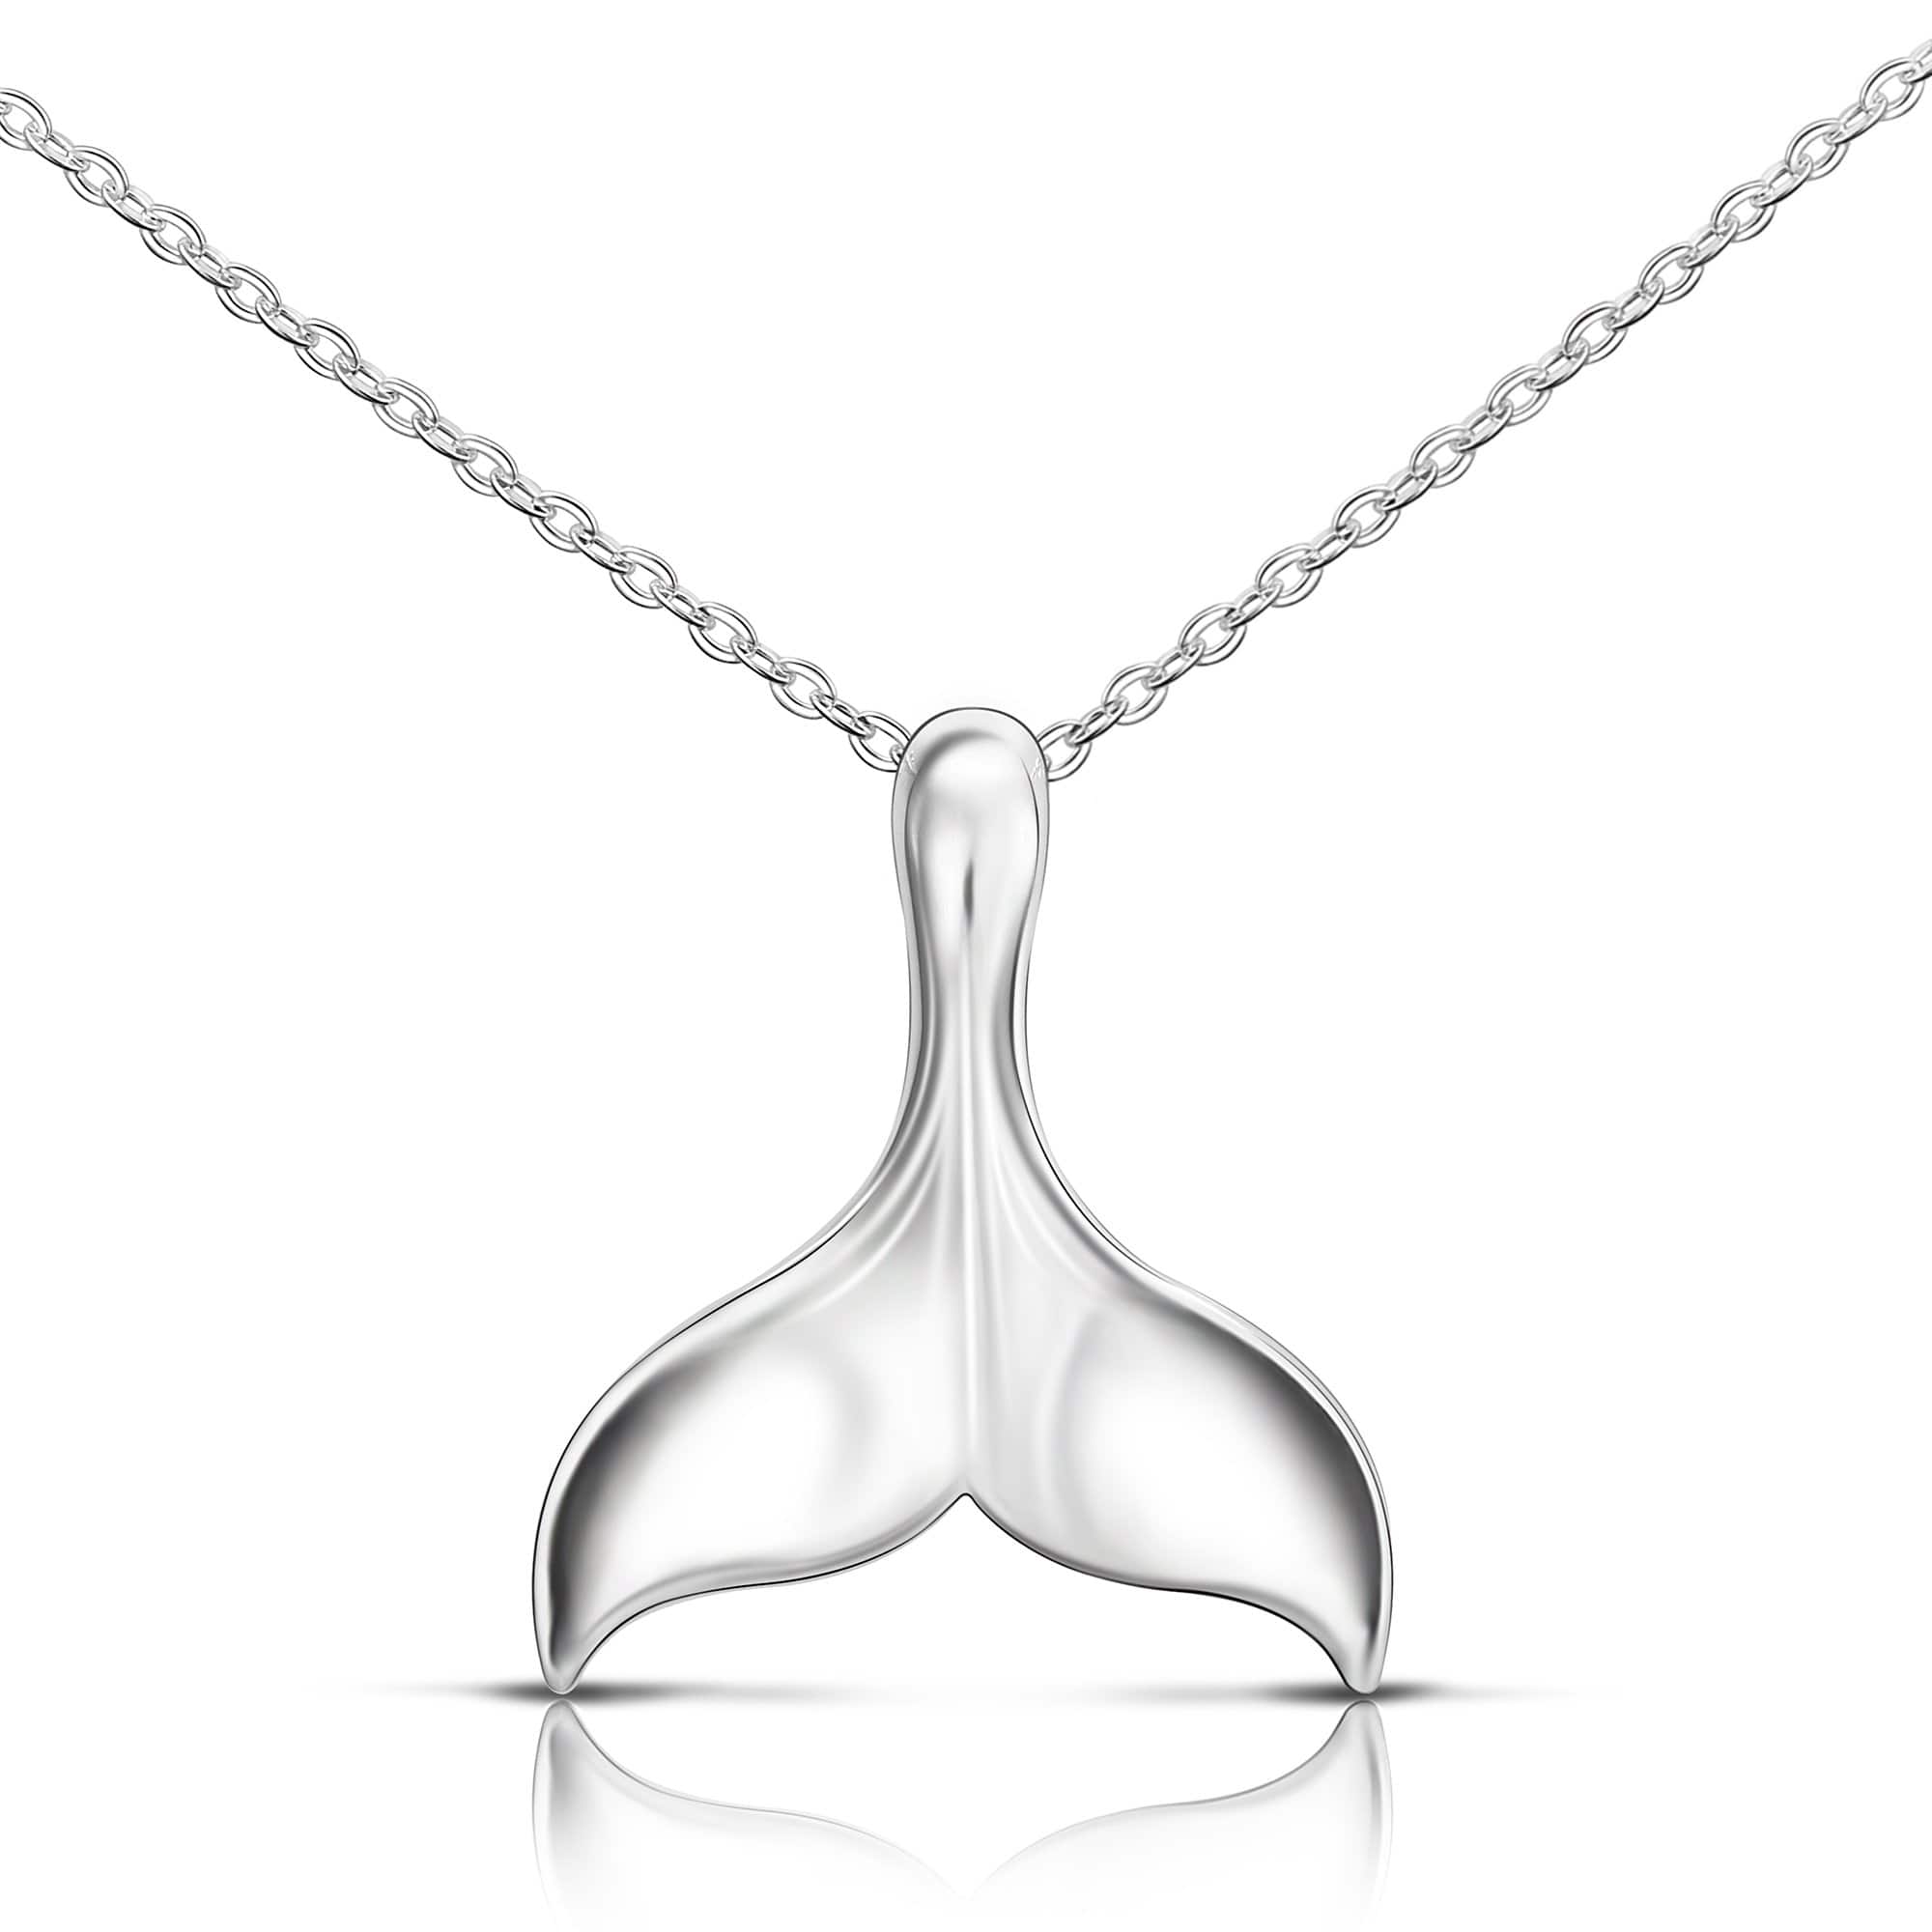 Whale Tail Necklace Sterling Silver Chain